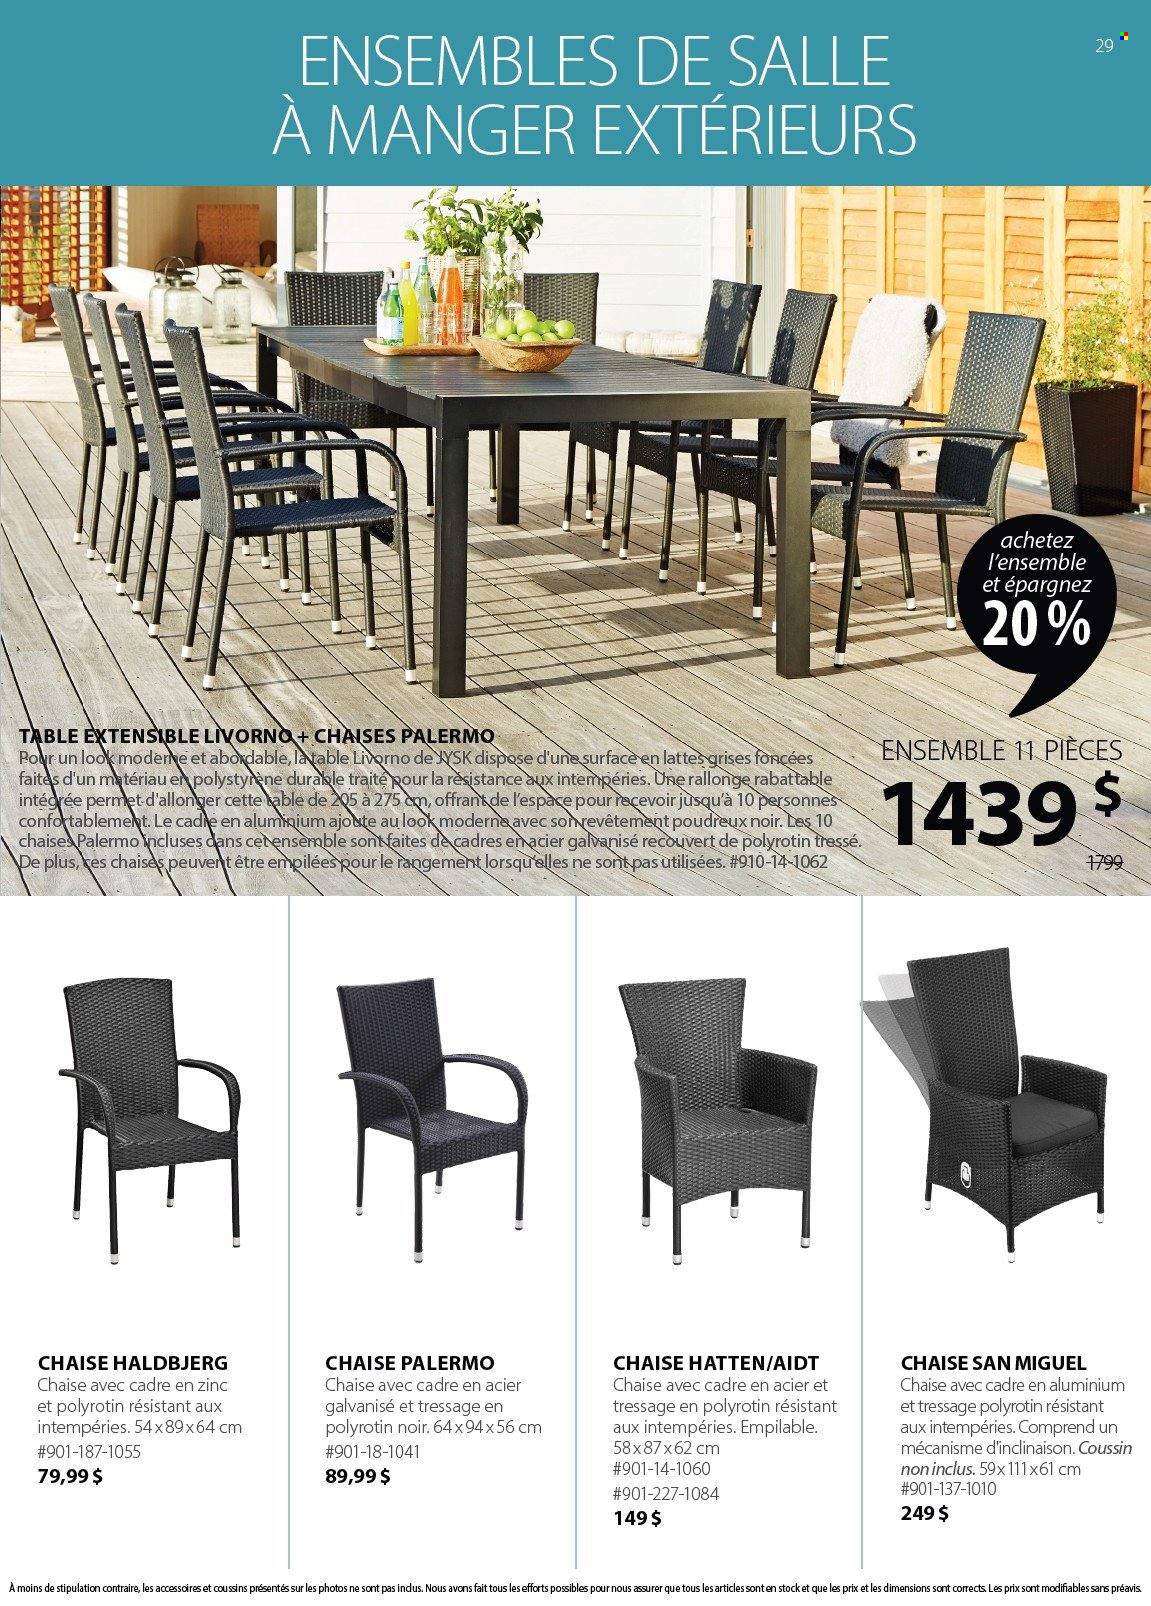 thumbnail - JYSK Flyer - Sales products - table. Page 29.